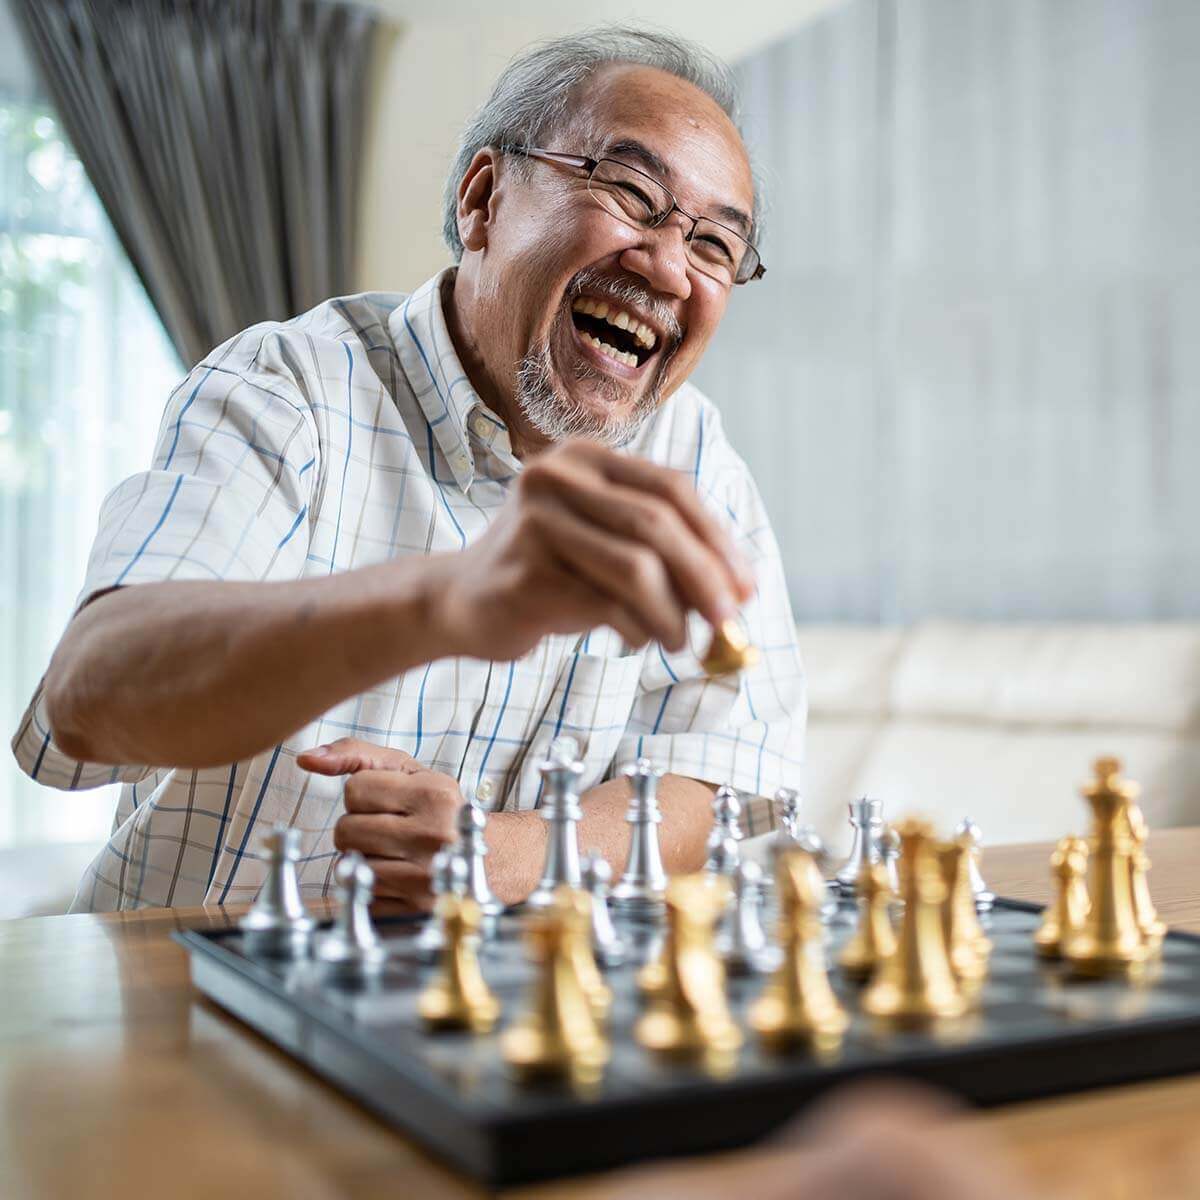 Home exceptional amenities senior playing chess with senior citizen